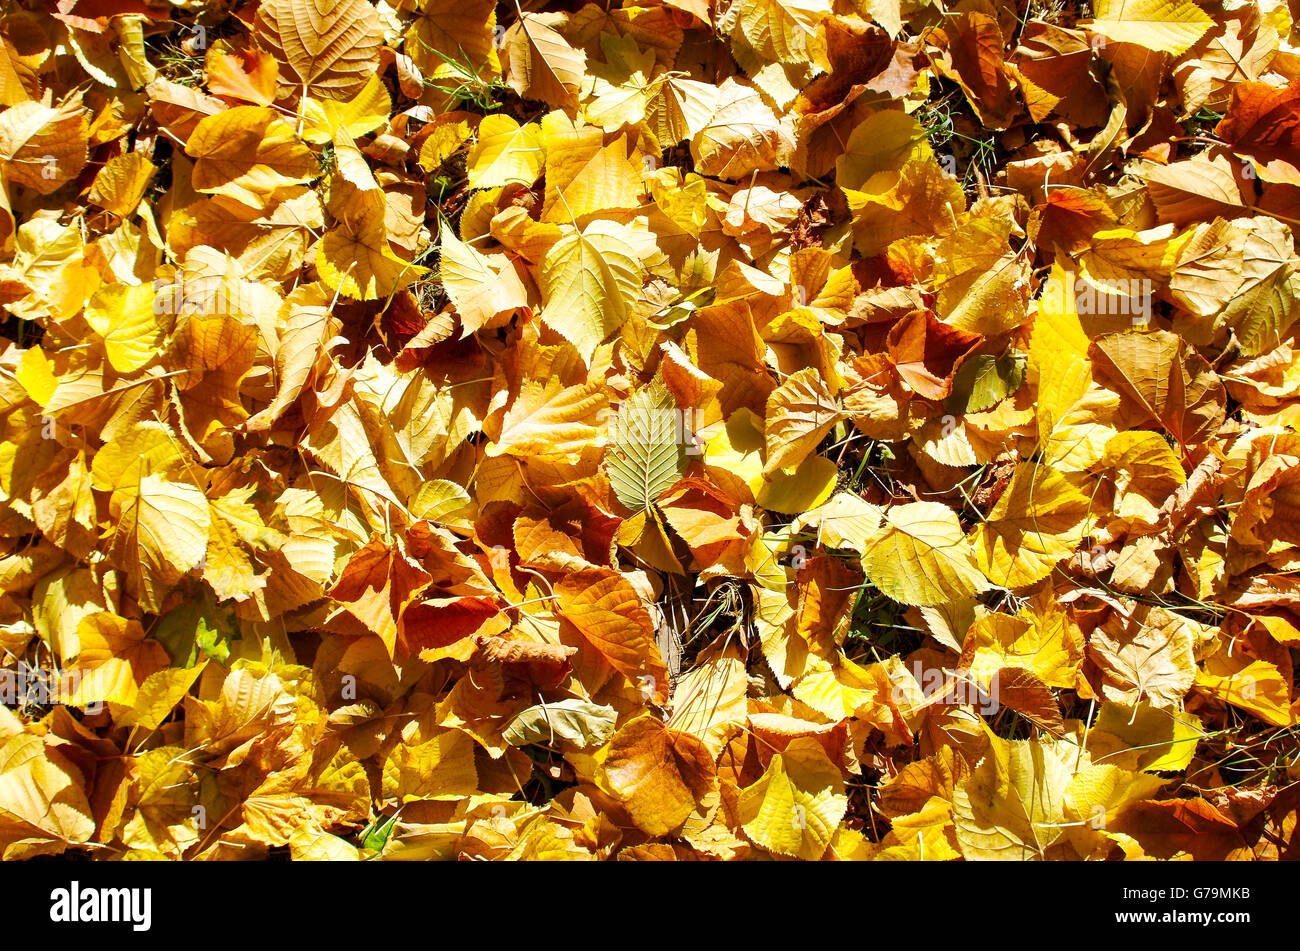 Overhead view vivid autumn leaves on linden trees after defoliation to be used as a background Stock Photo